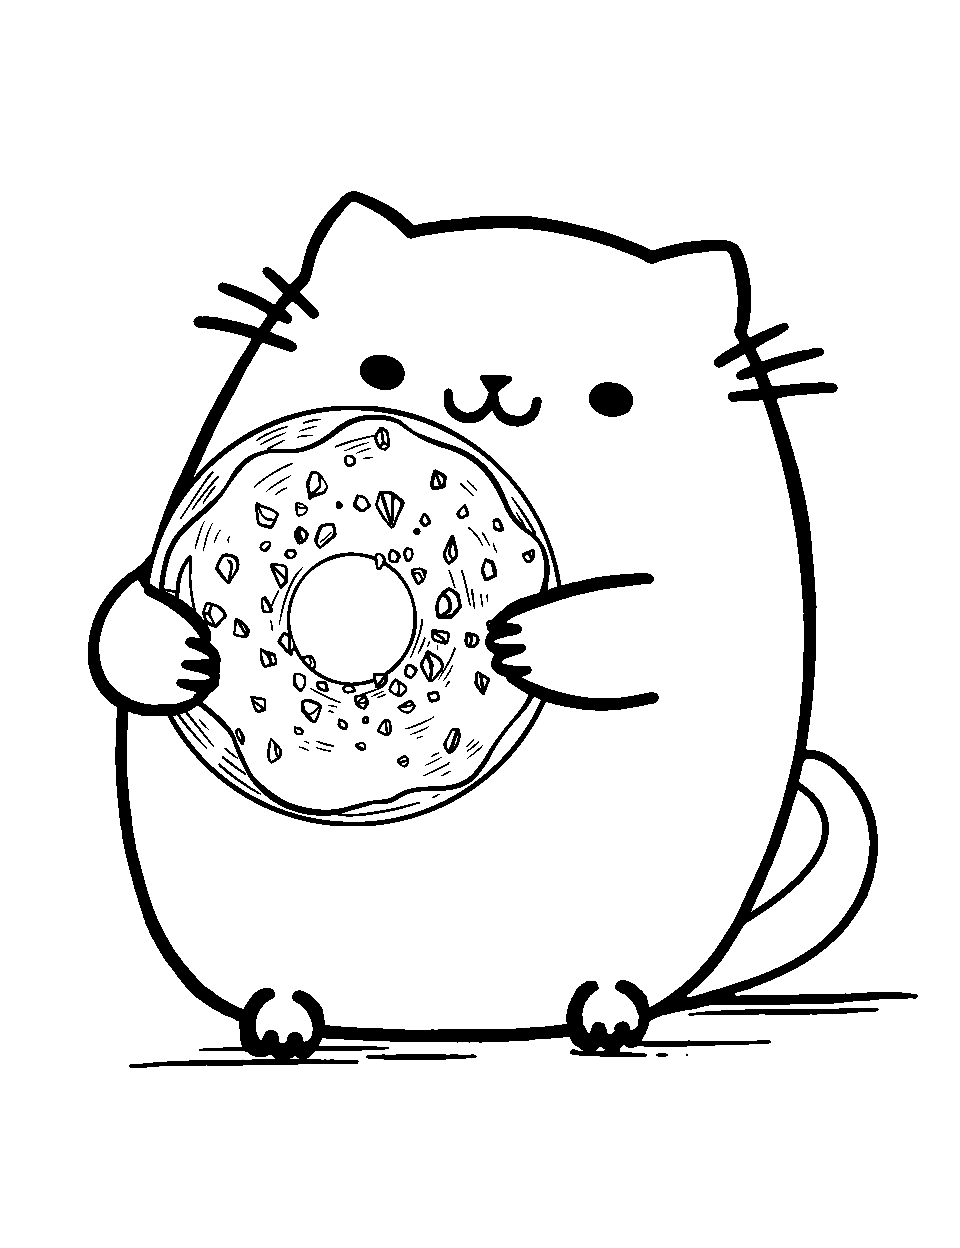 Pusheen Eating a Donut Coloring Page - Pusheen the cat with a large, delicious donut.